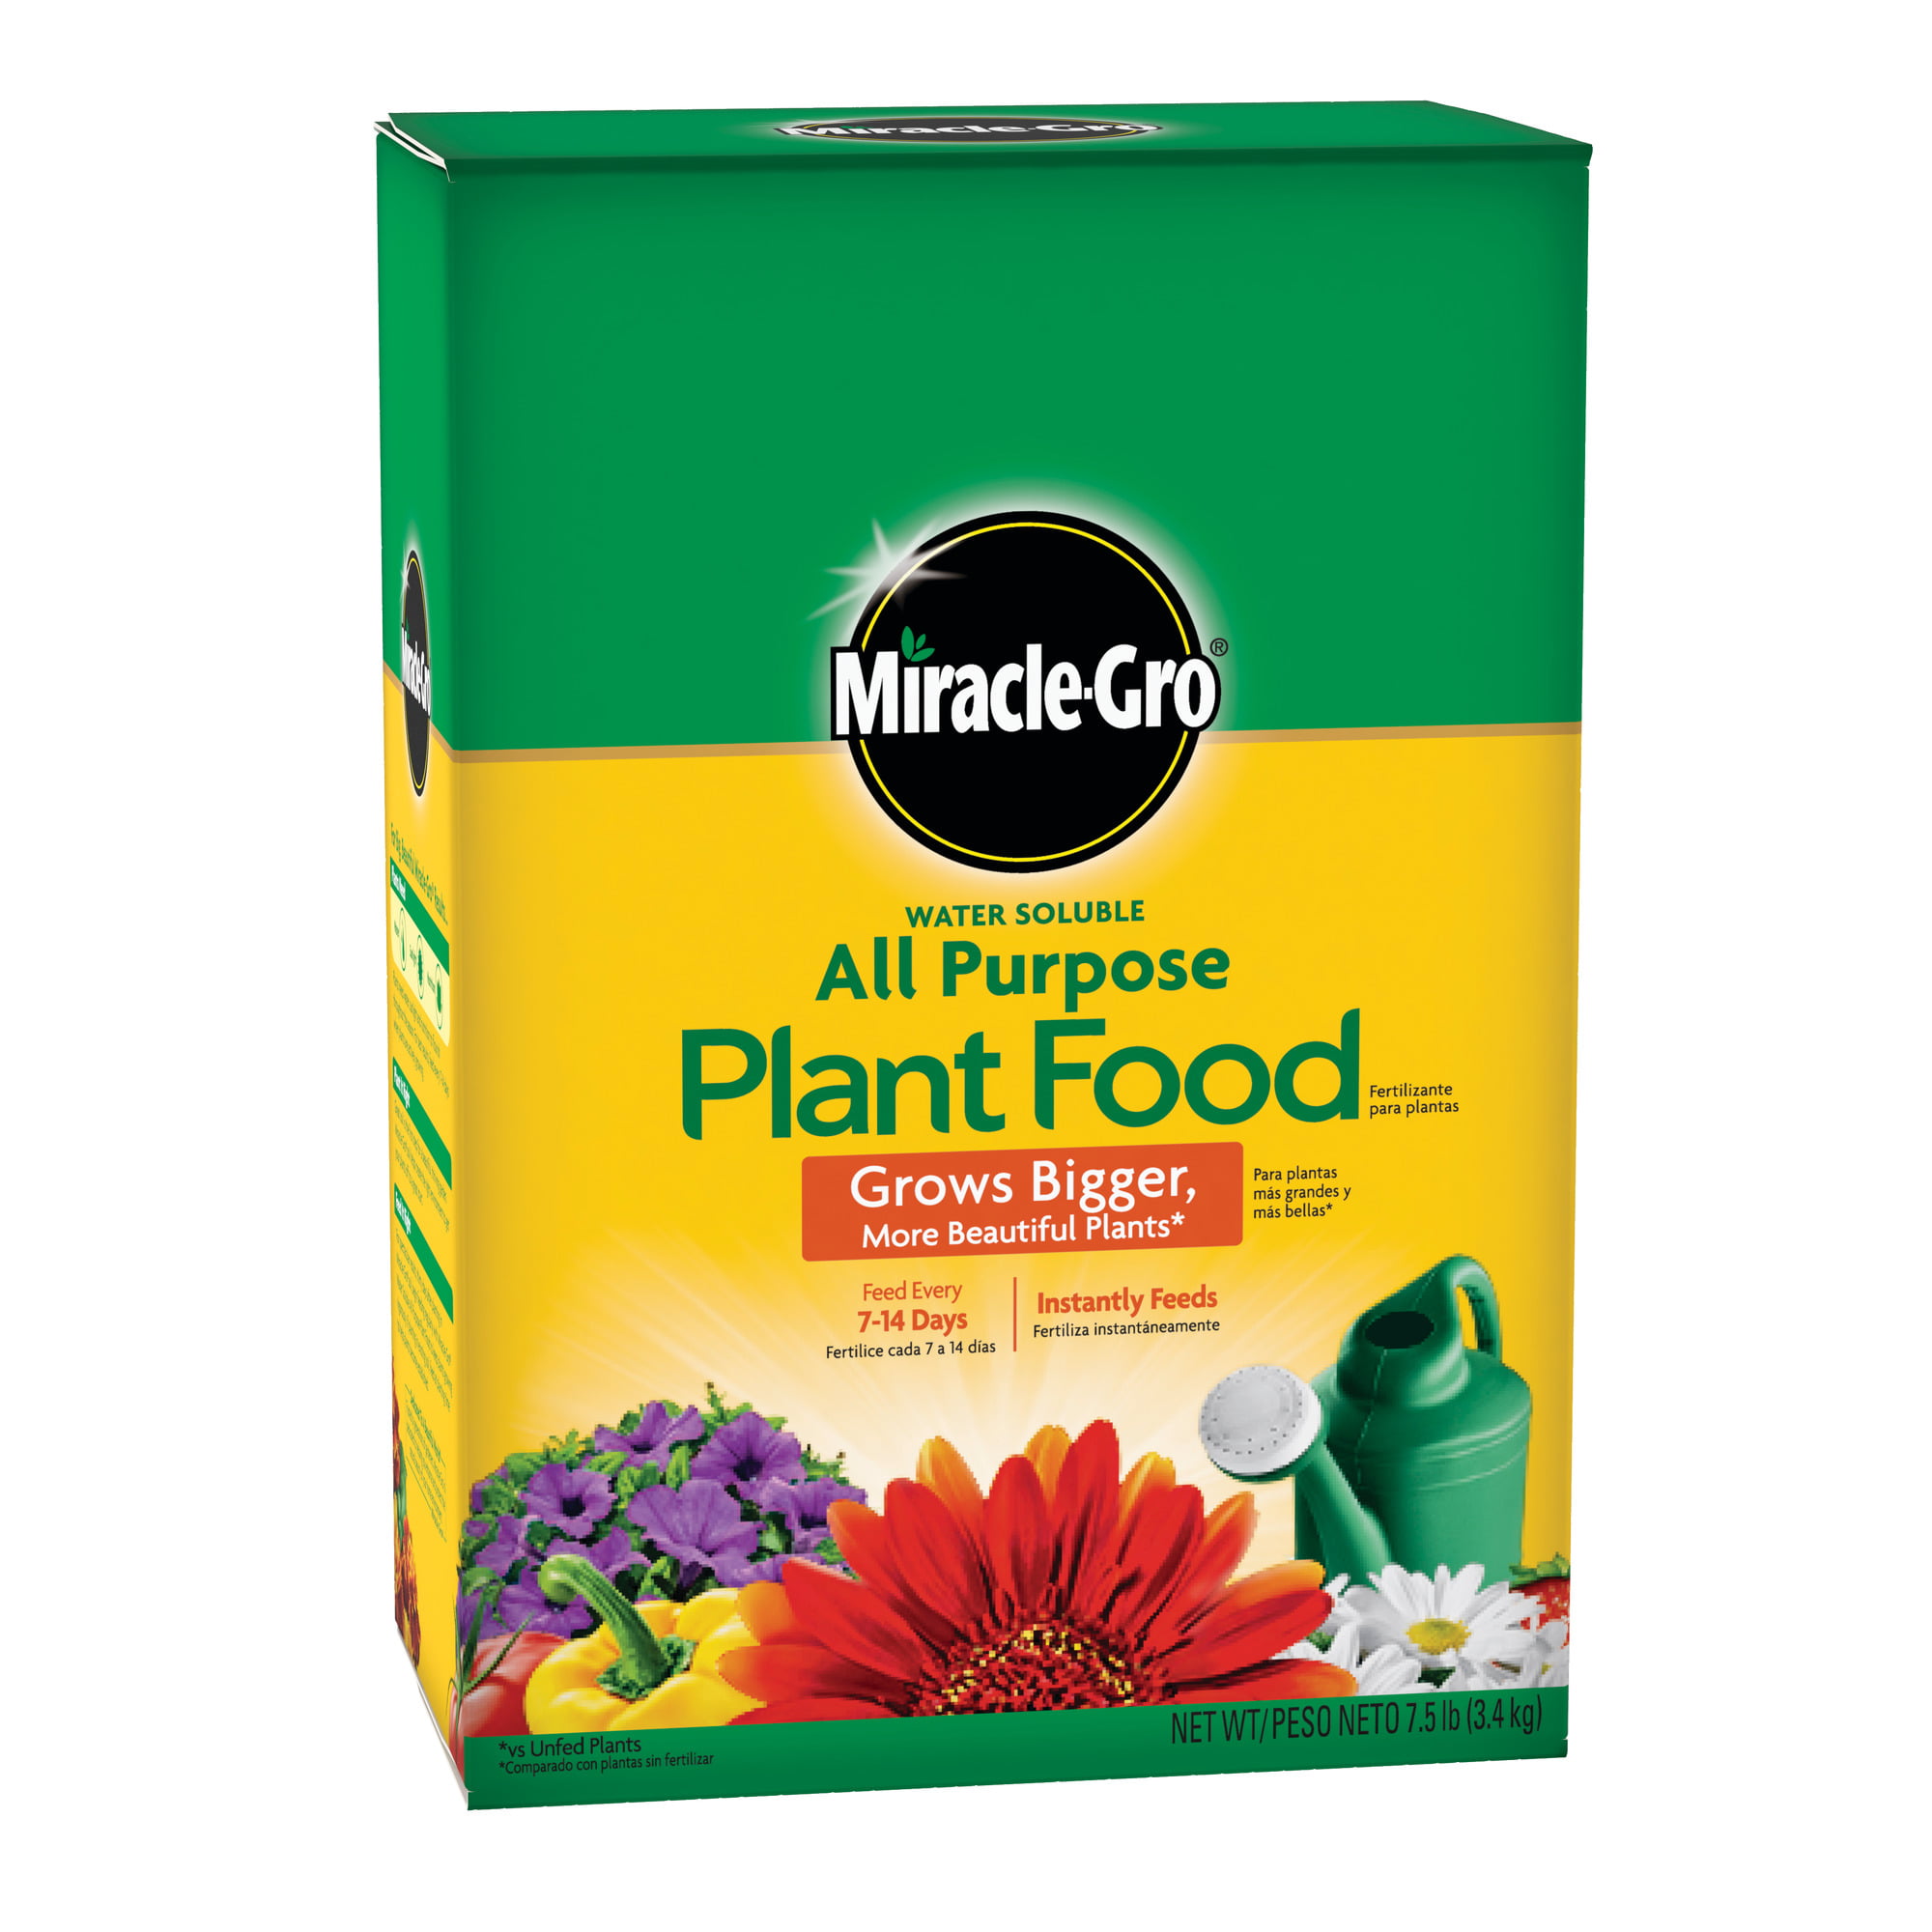 Miracle Gro Water Soluble All Purpose Plant Food 75 Lb